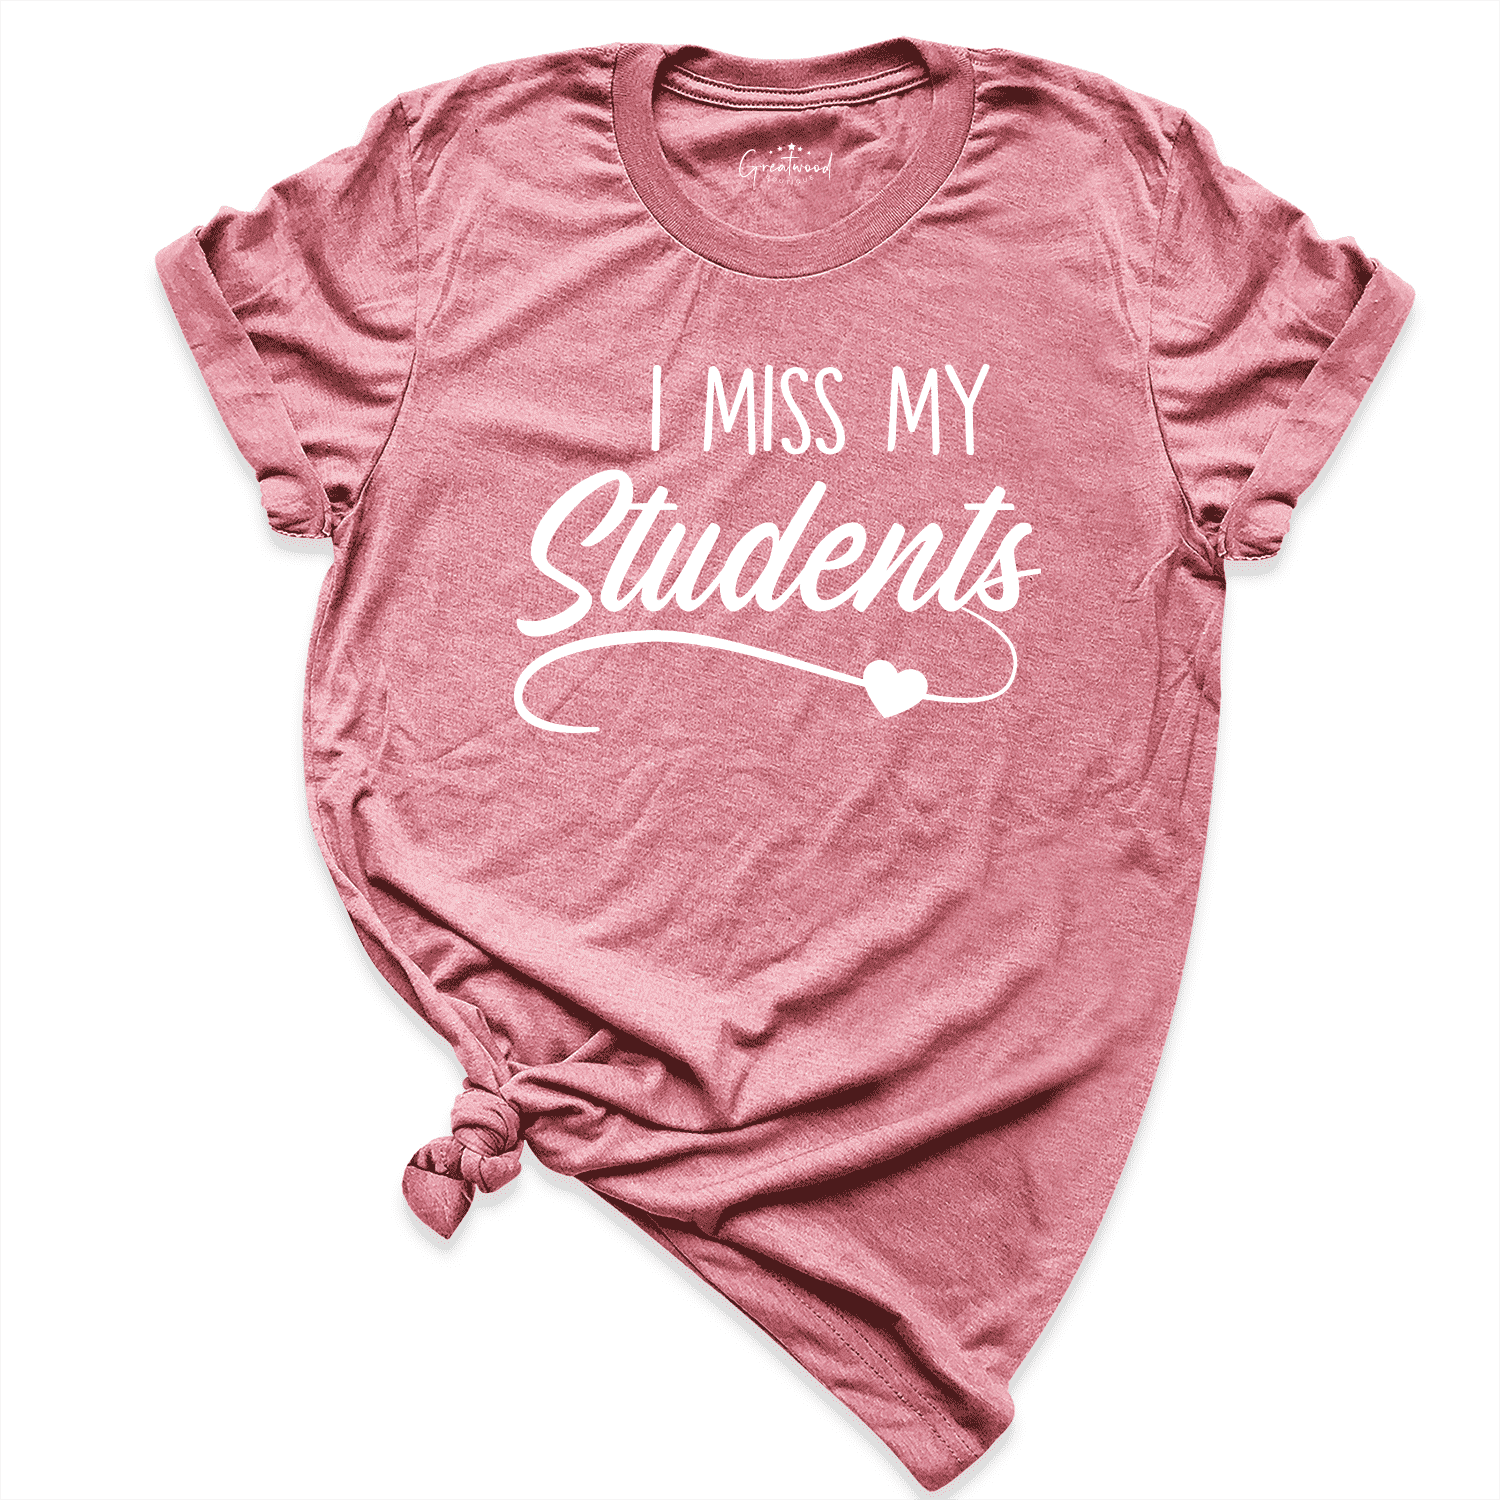 I Miss My Students Shirt Mauve - Greatwood Boutique